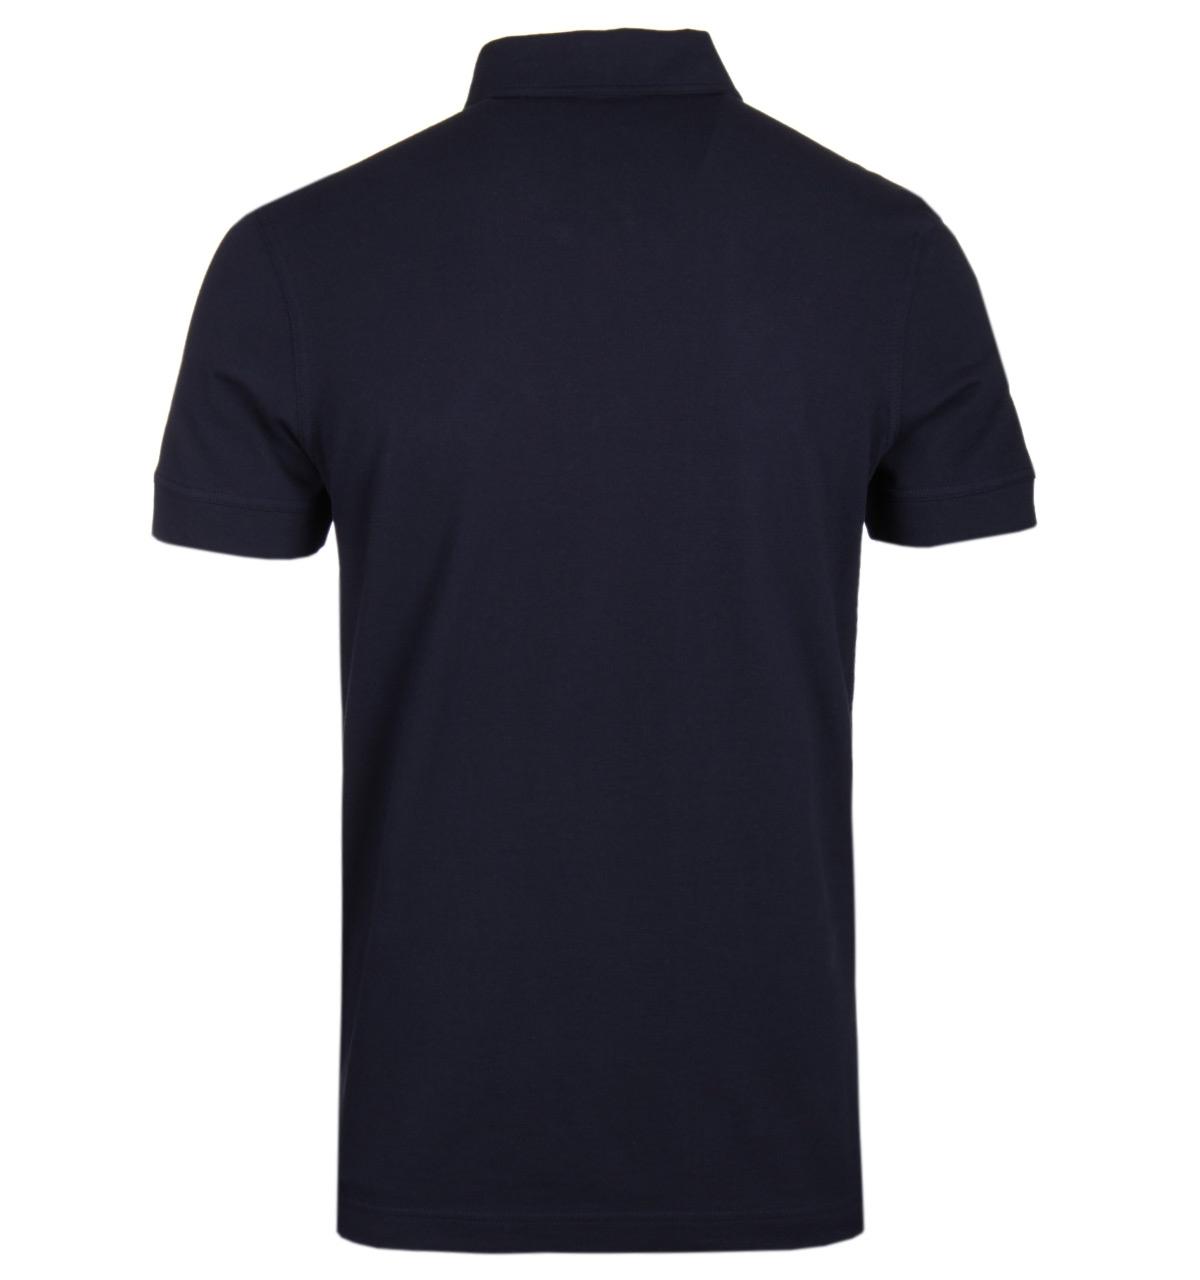 BOSS by Hugo Boss Cotton Palace Navy Polo Shirt in Blue for Men - Lyst